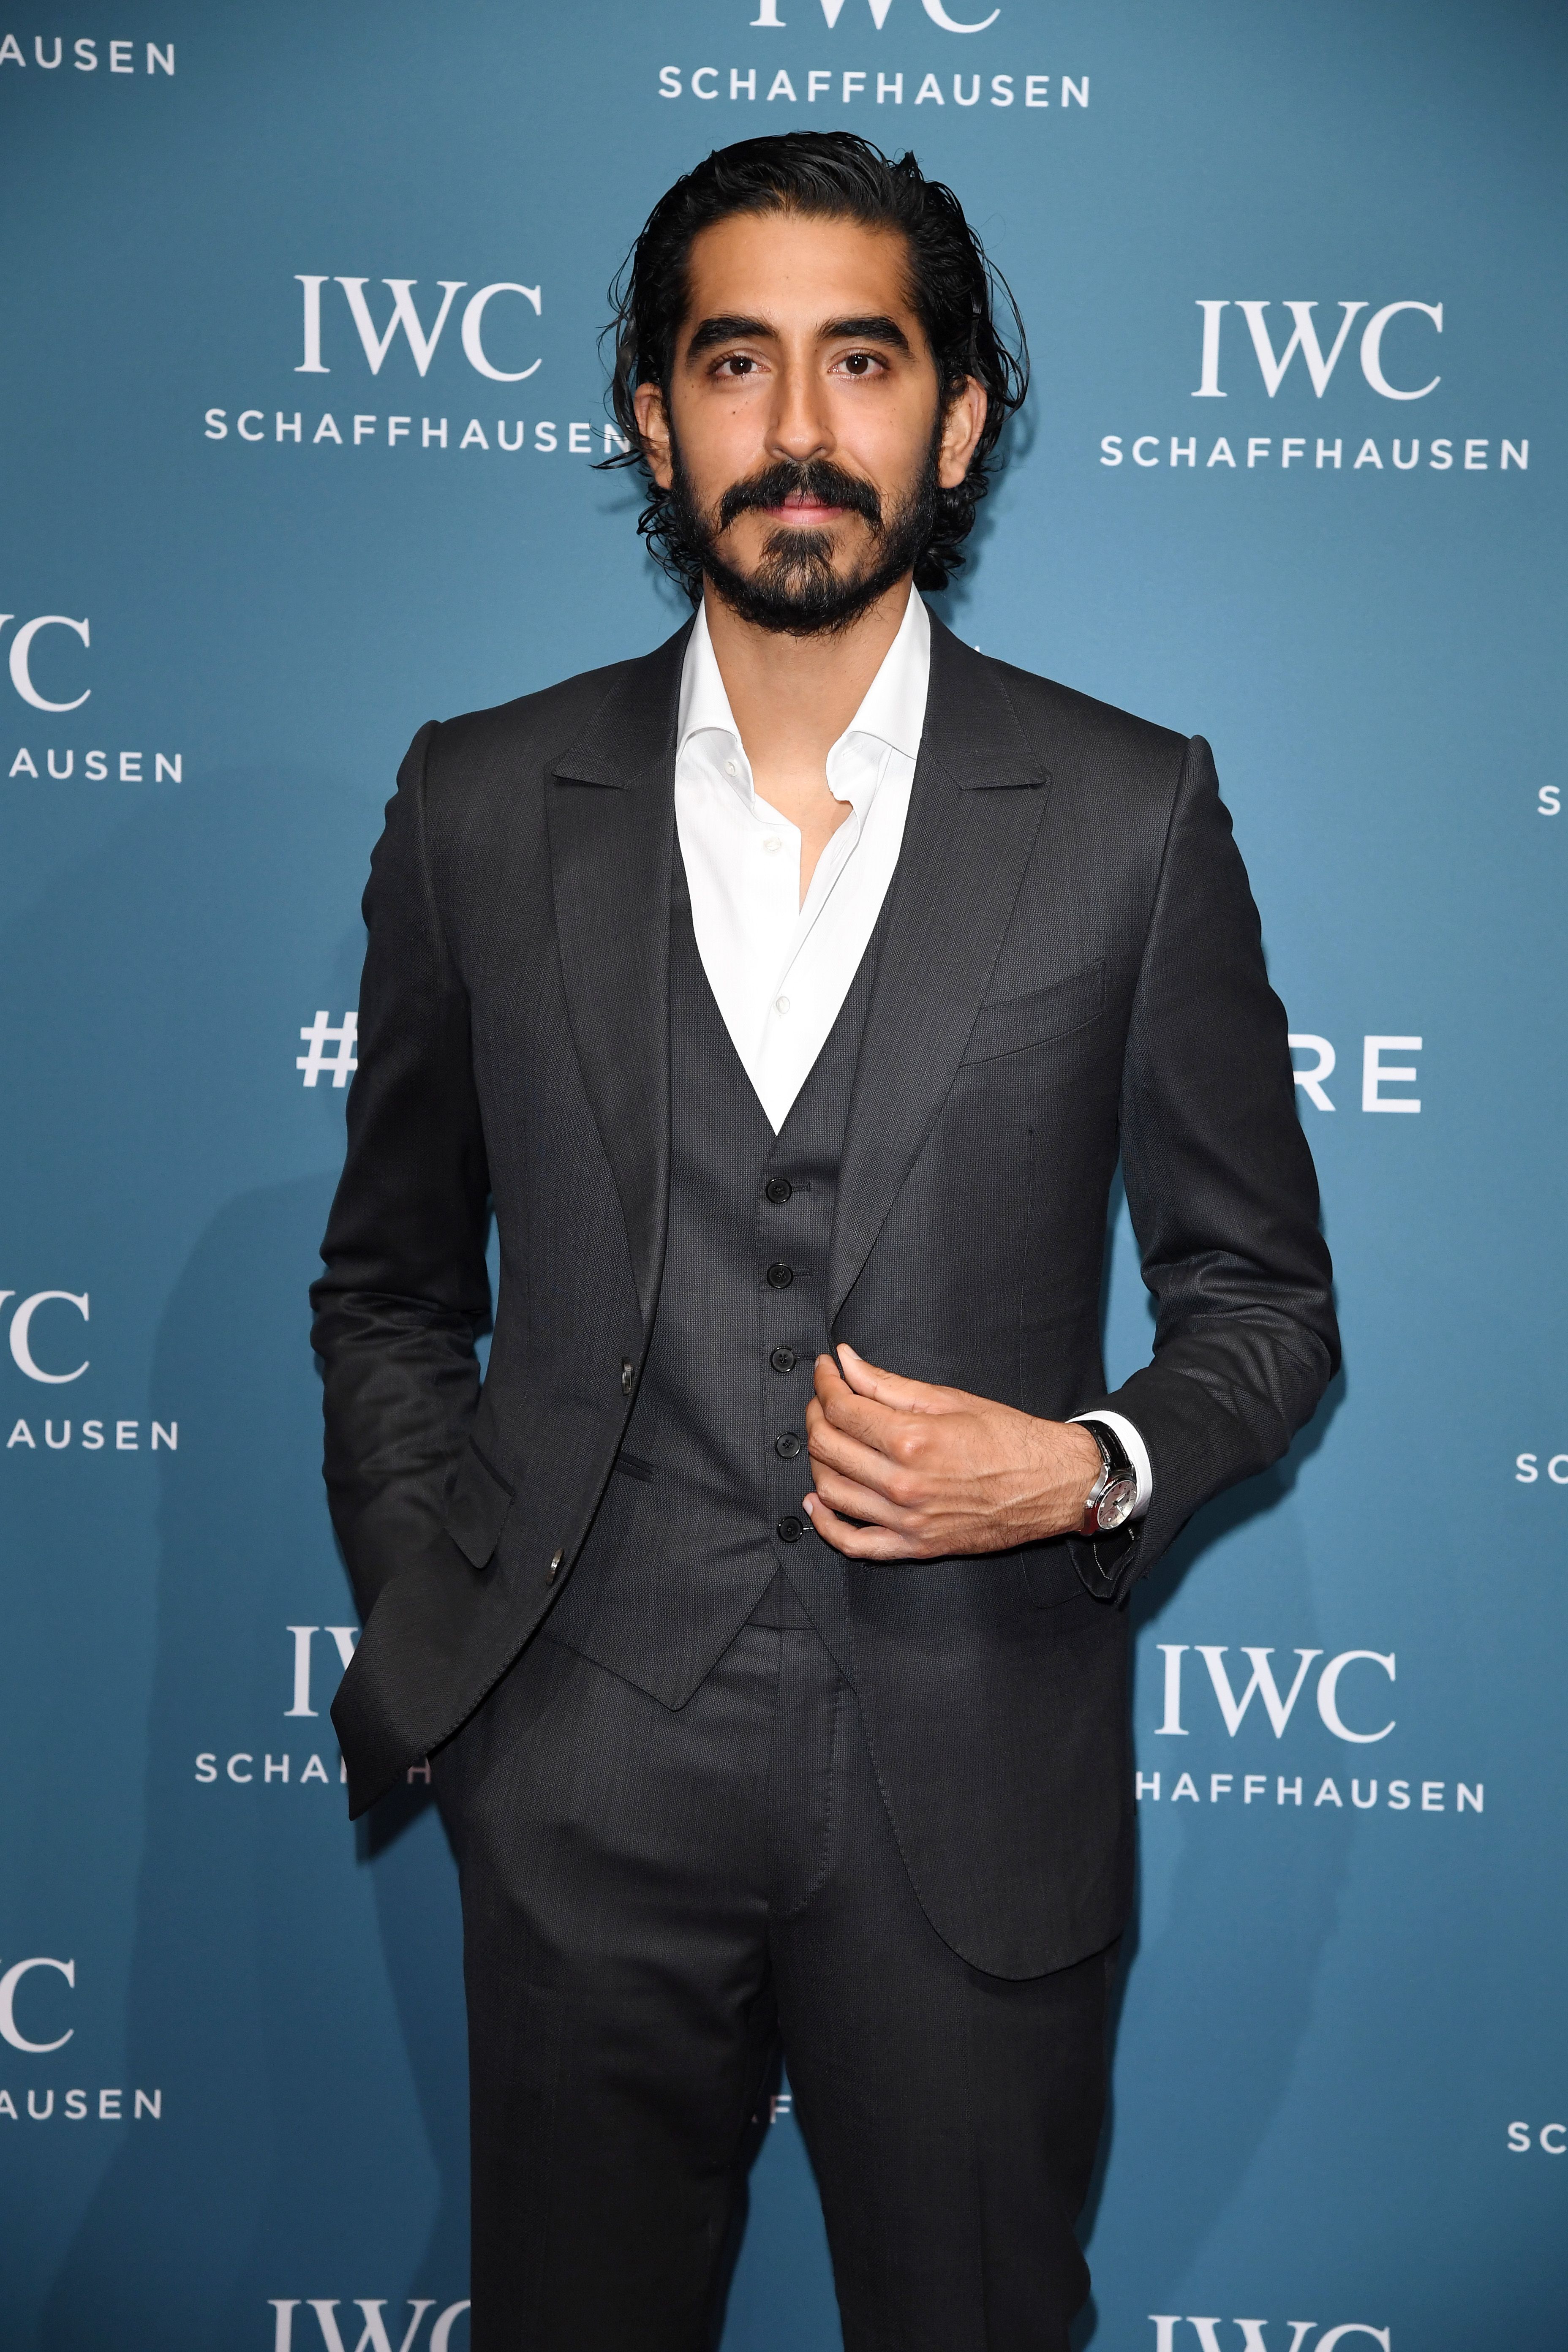 He Wanted A Medium Length Hairstyle Like Dev Patel Dev Patel INSPIRED Wavy  Hairstyle  YouTube